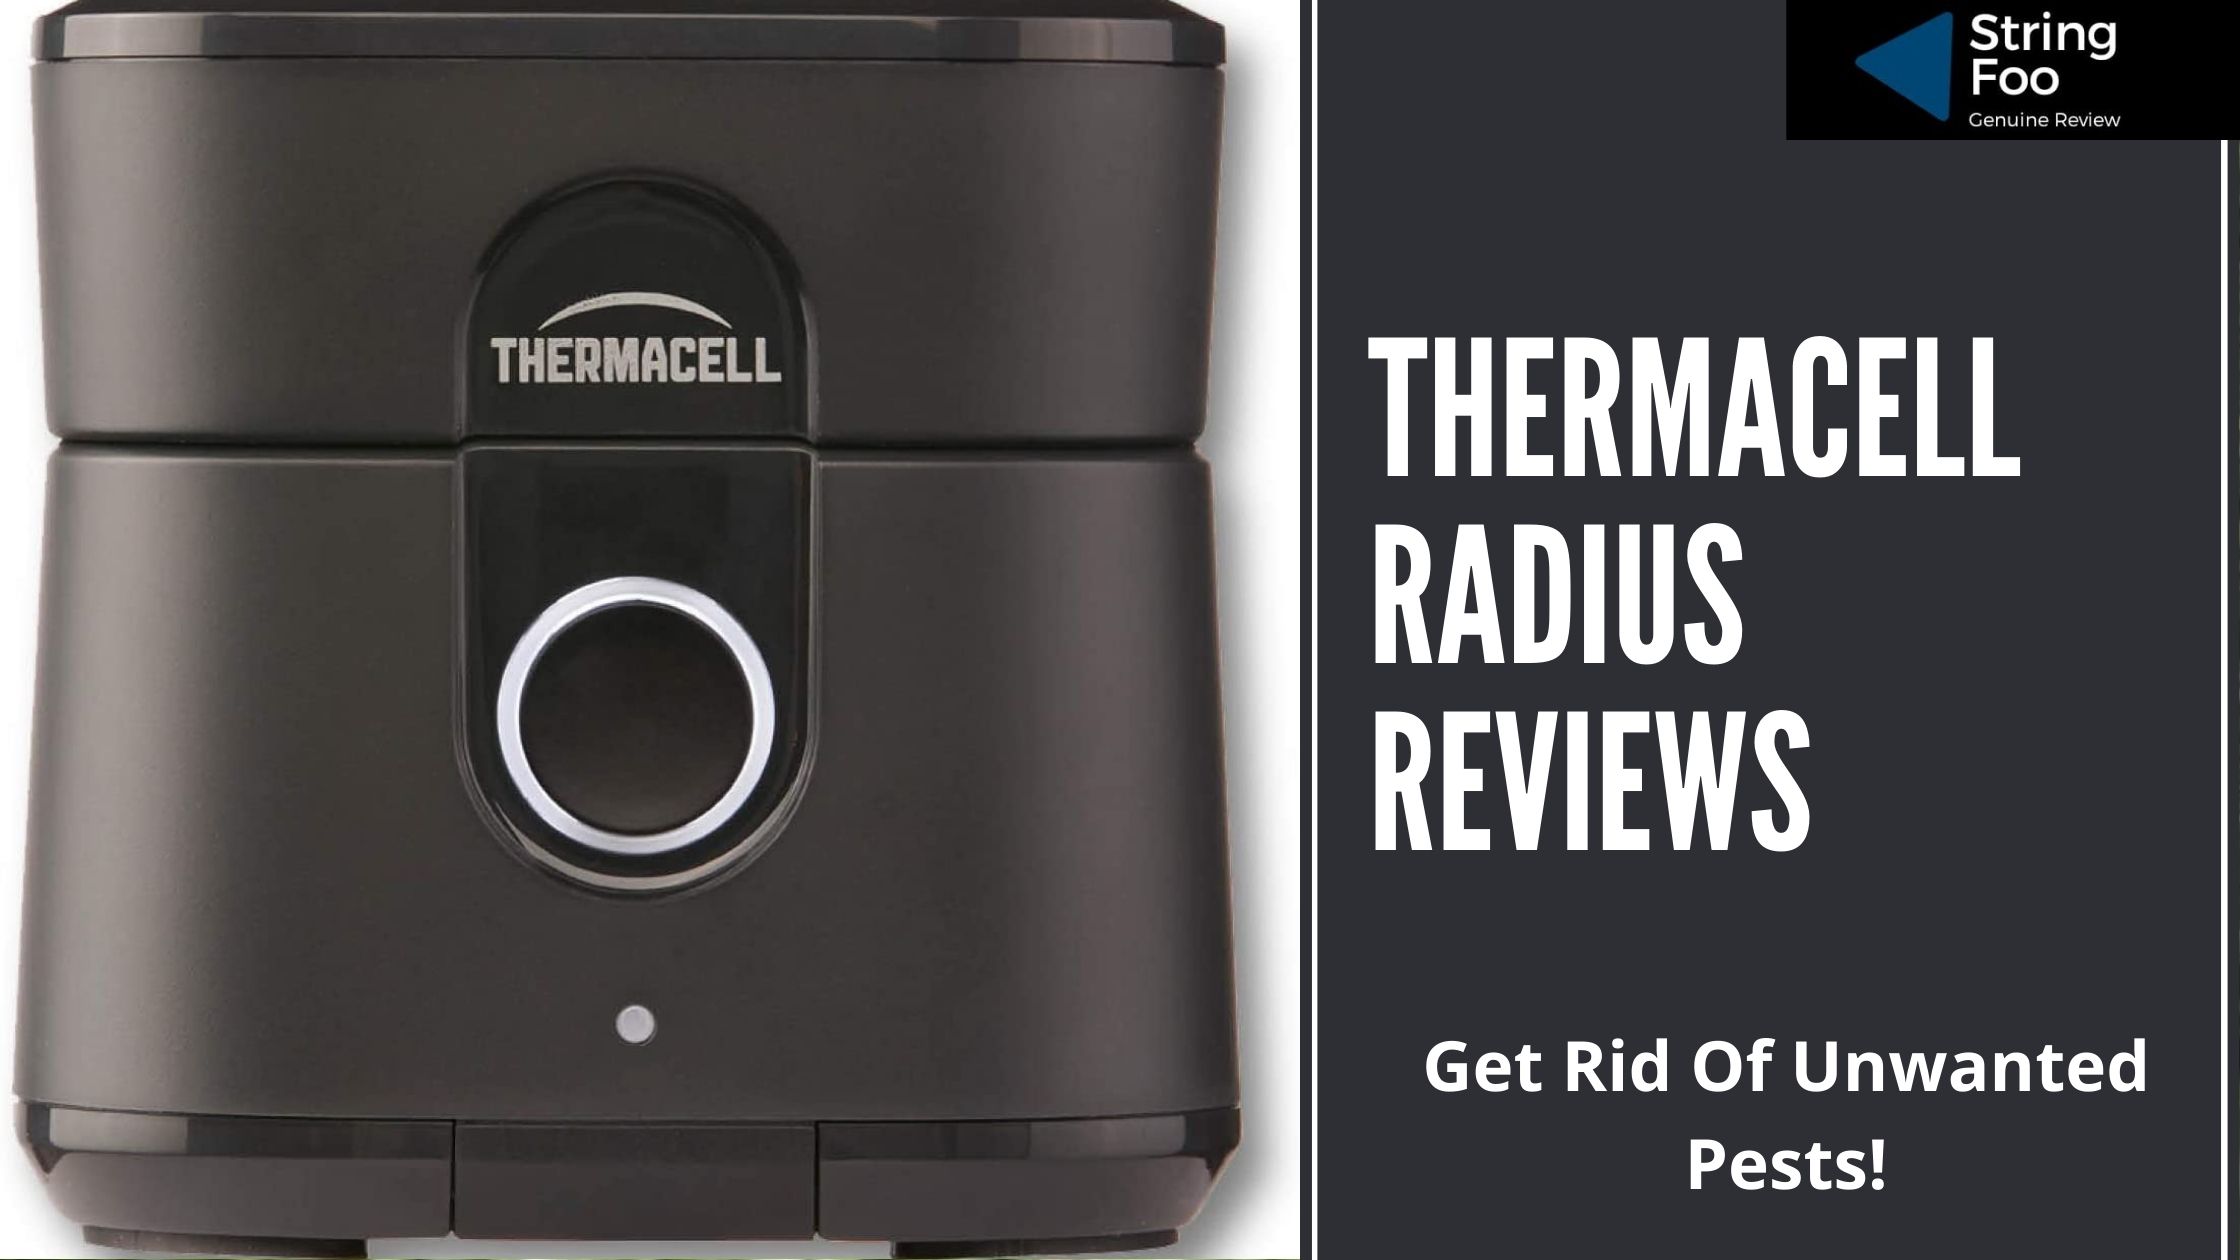 Thermacell Radius Review